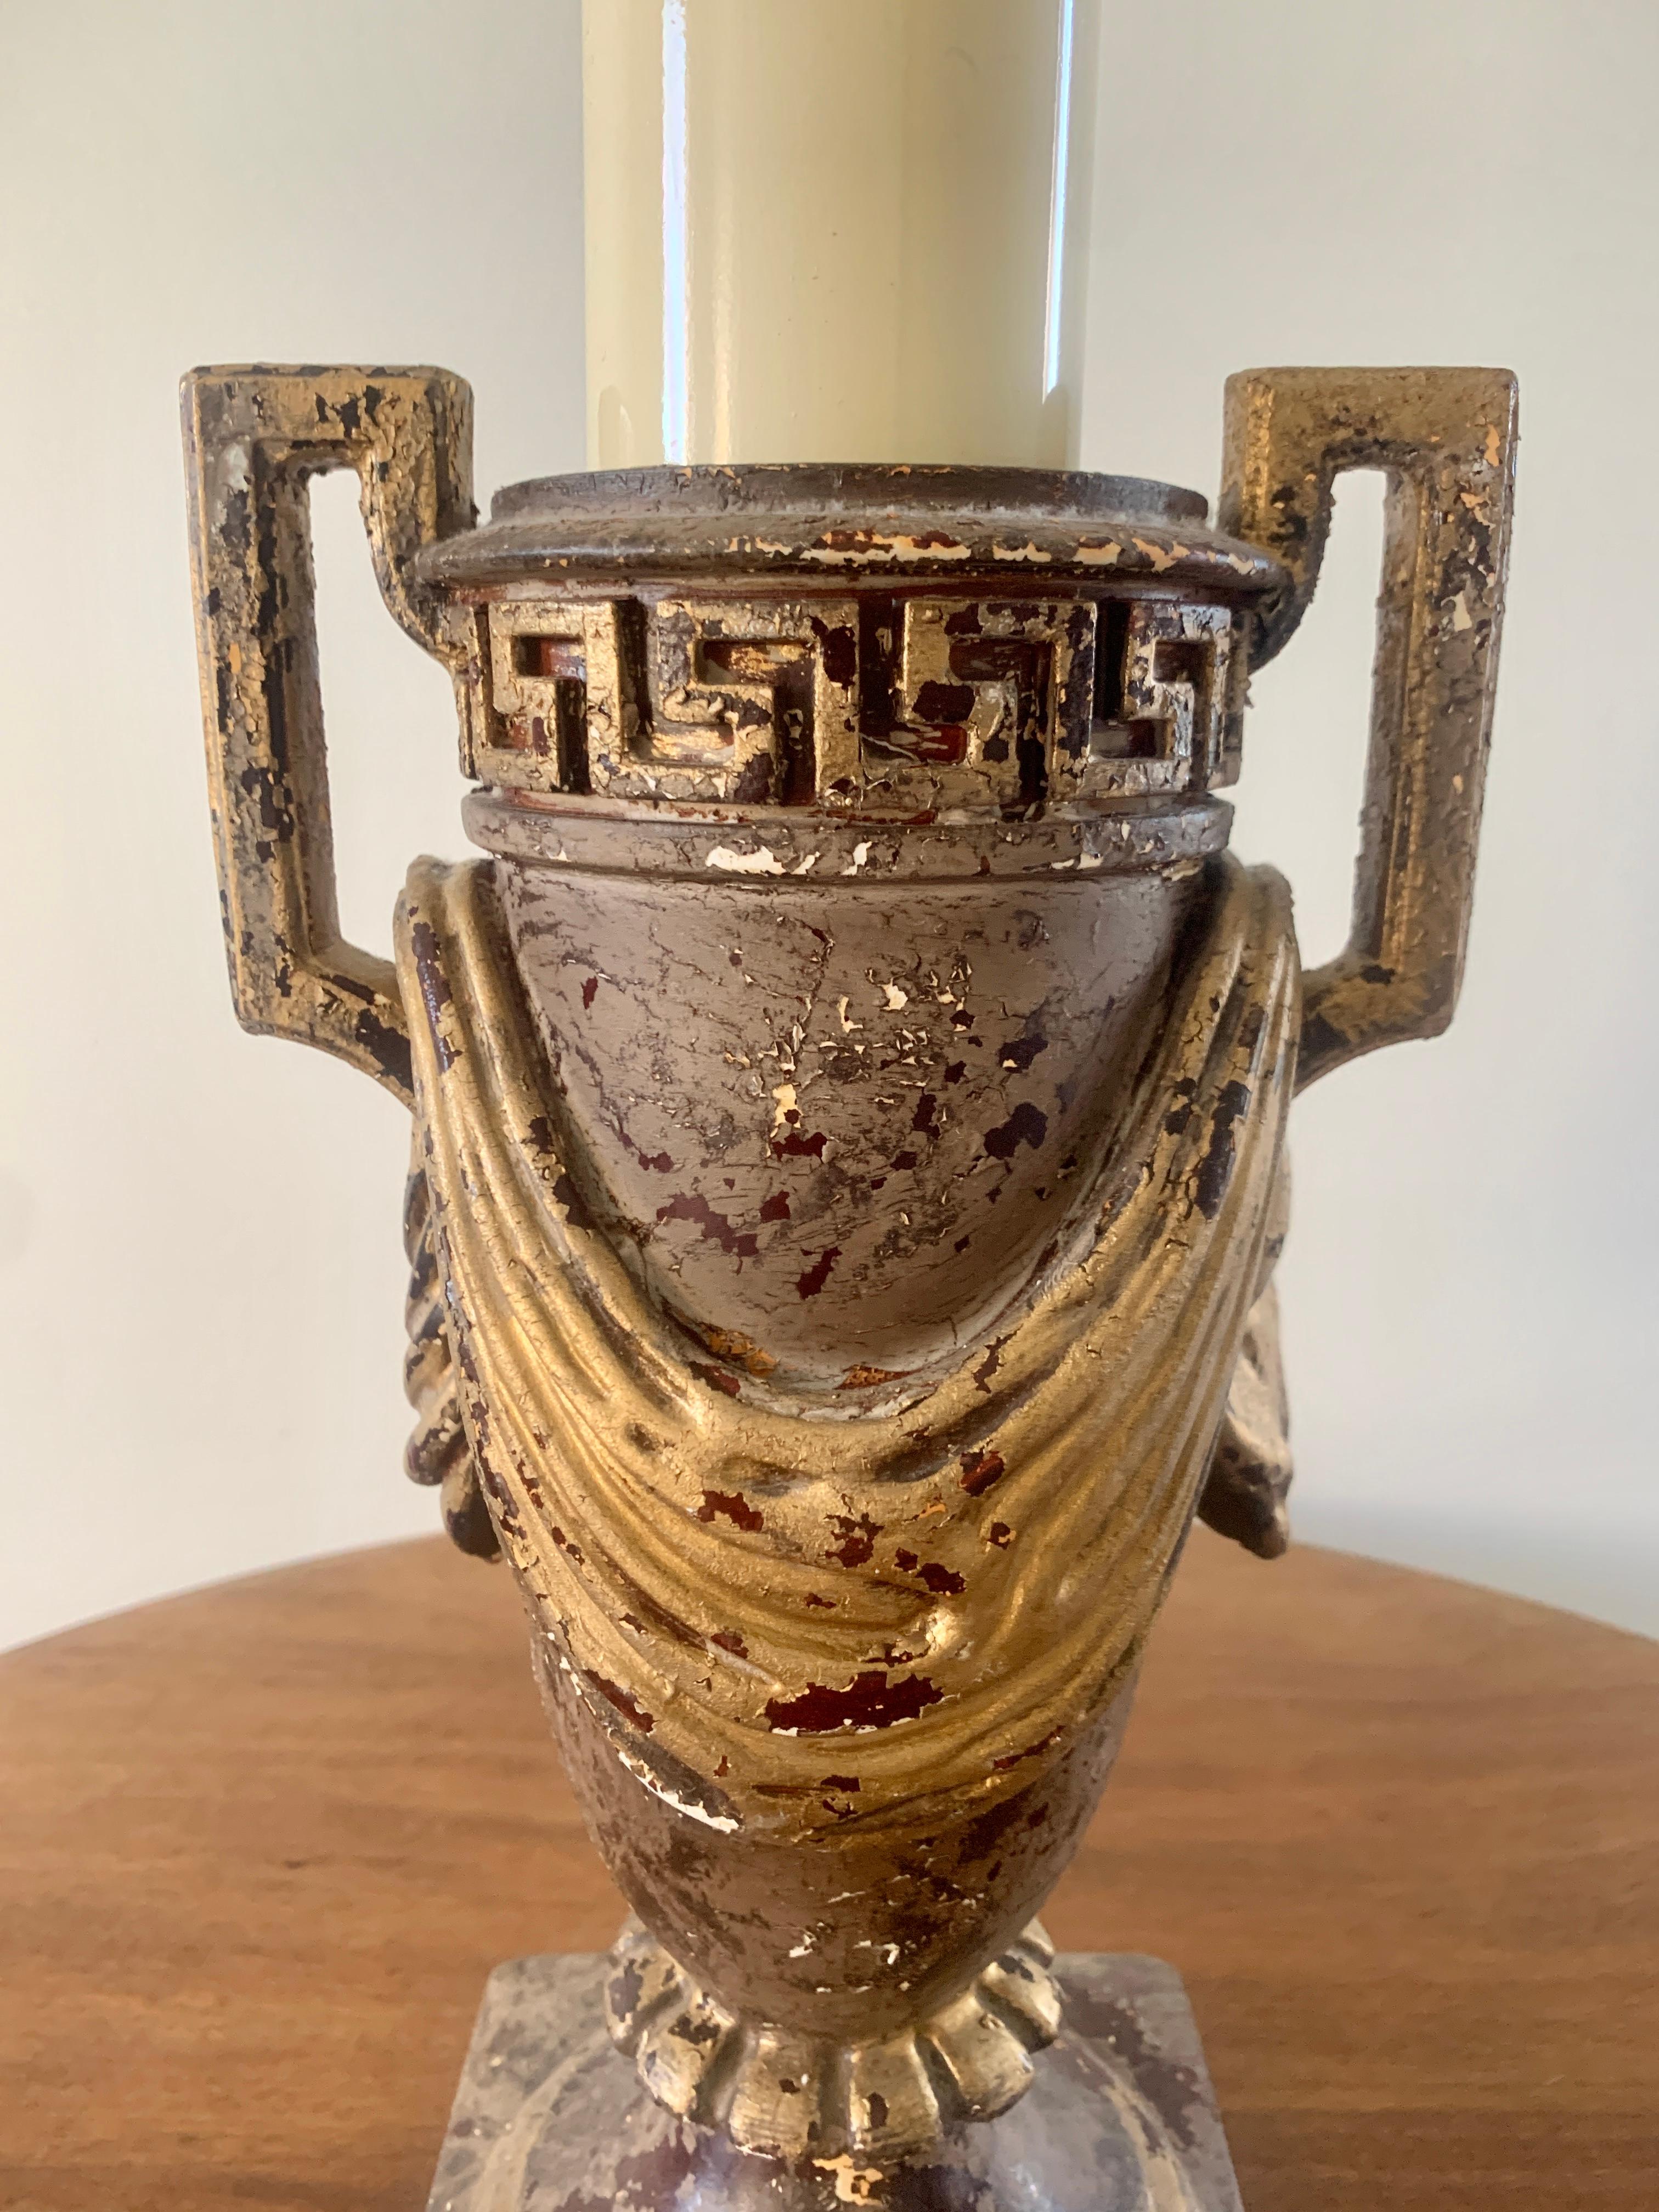 A gorgeous neoclassical style urn form table lamp with Greek key and swag details

Measures: 5.75